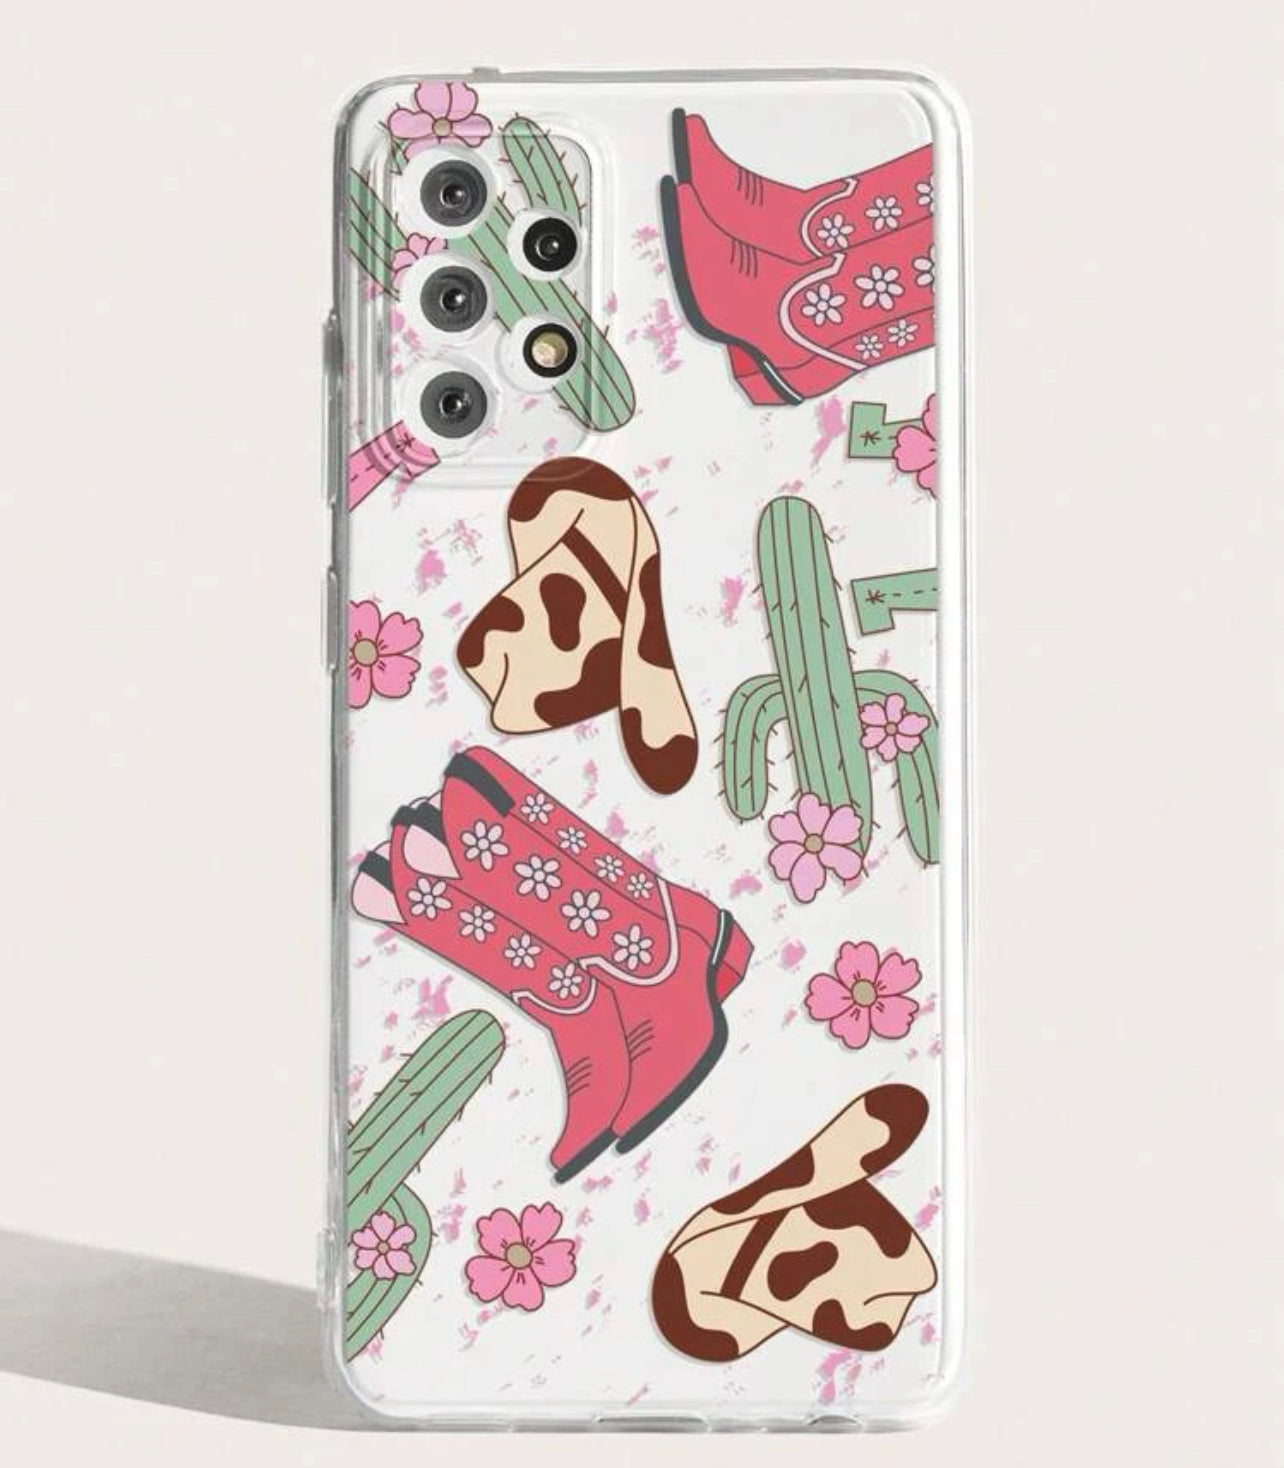 The Cowgirl Rodeo Phone Case